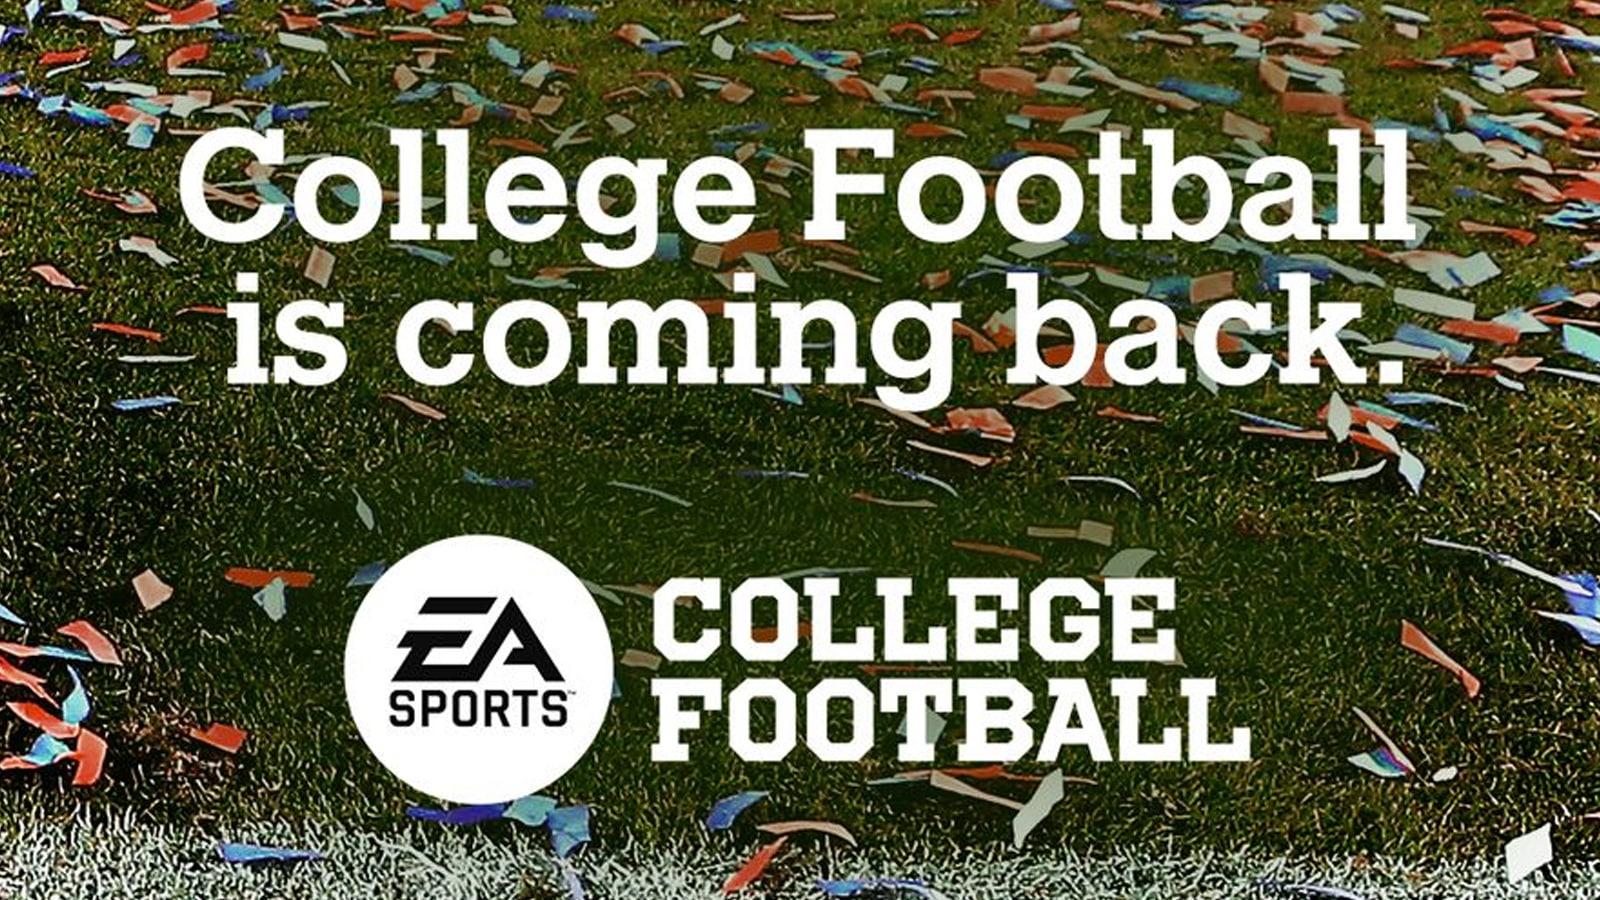 an image of ea sports college football